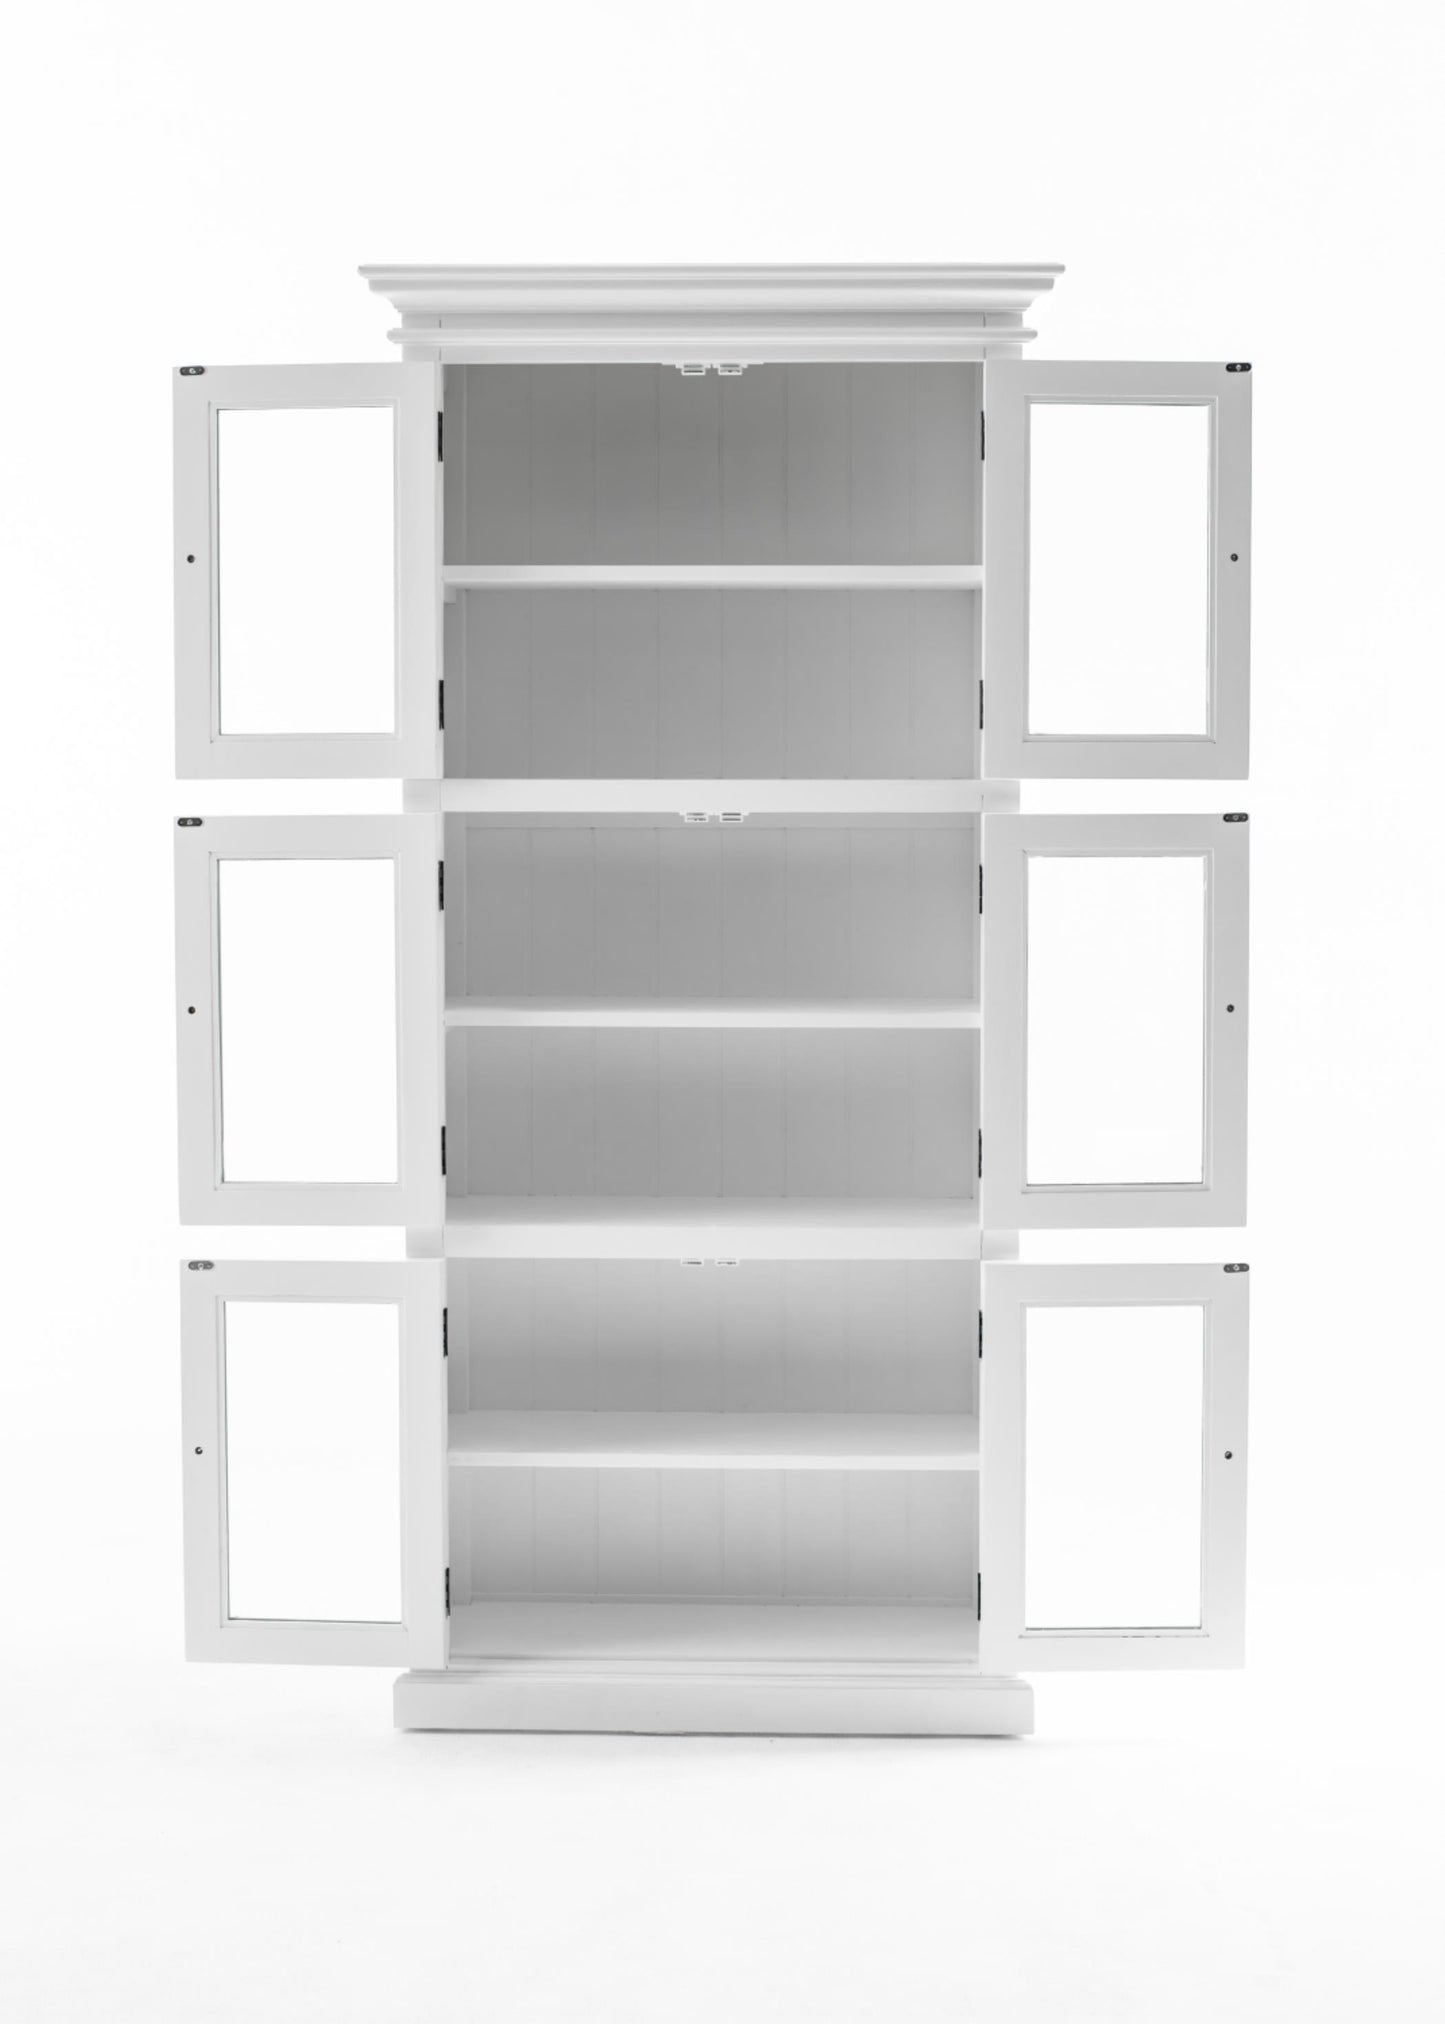 Halifax collection by Nova Solo.  3 Level Pantry CasaFenix